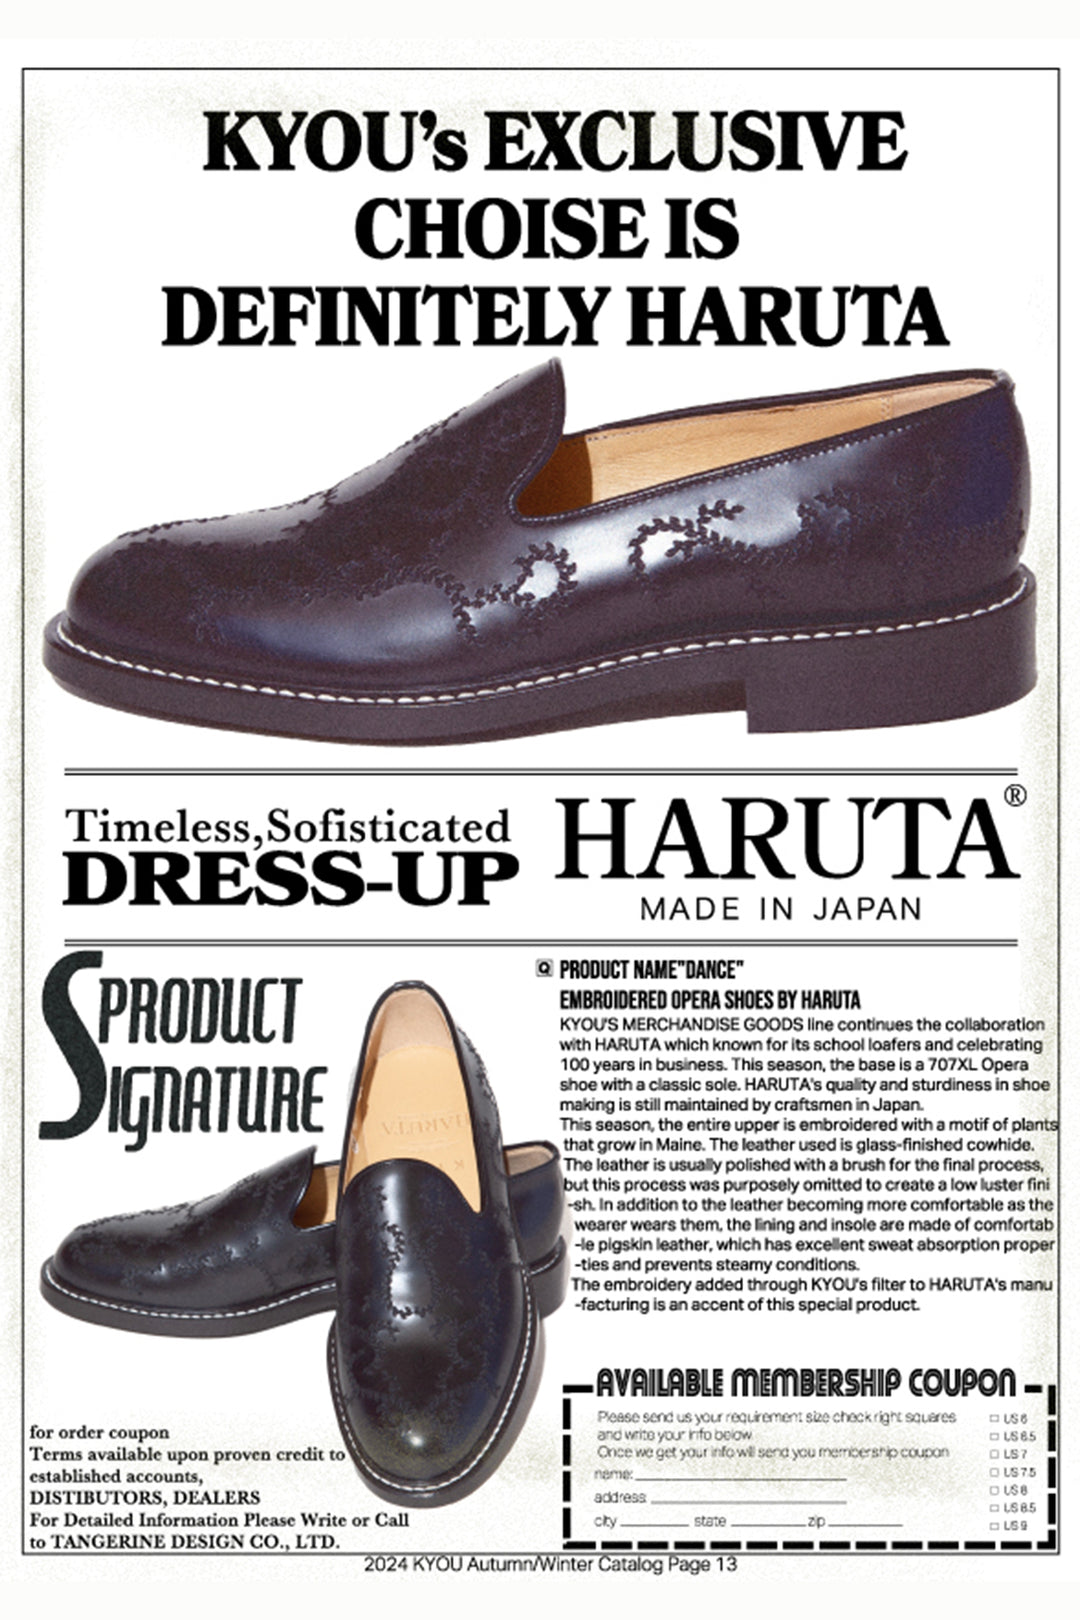 "DANCE" Embroidered Opera Shoes by HARUTA